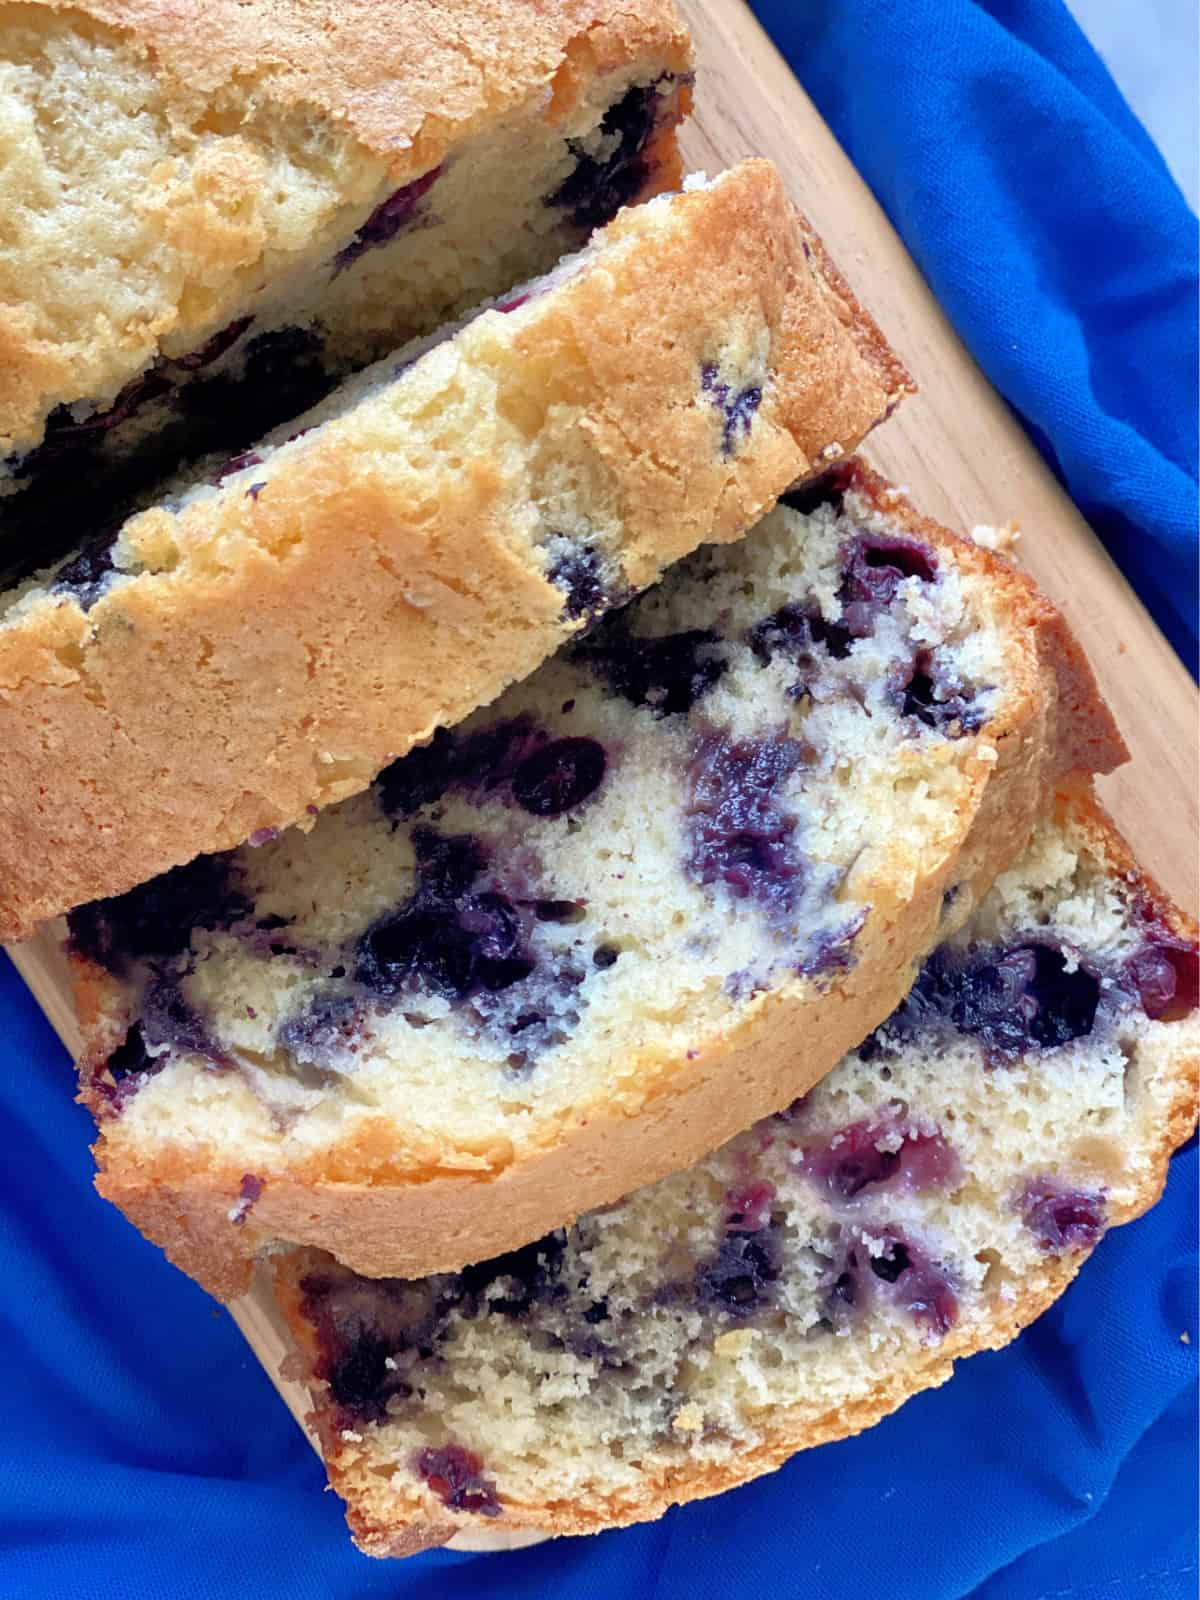 Top view of three slices of blueberry bread sitting on a cutting board and blue cloth.